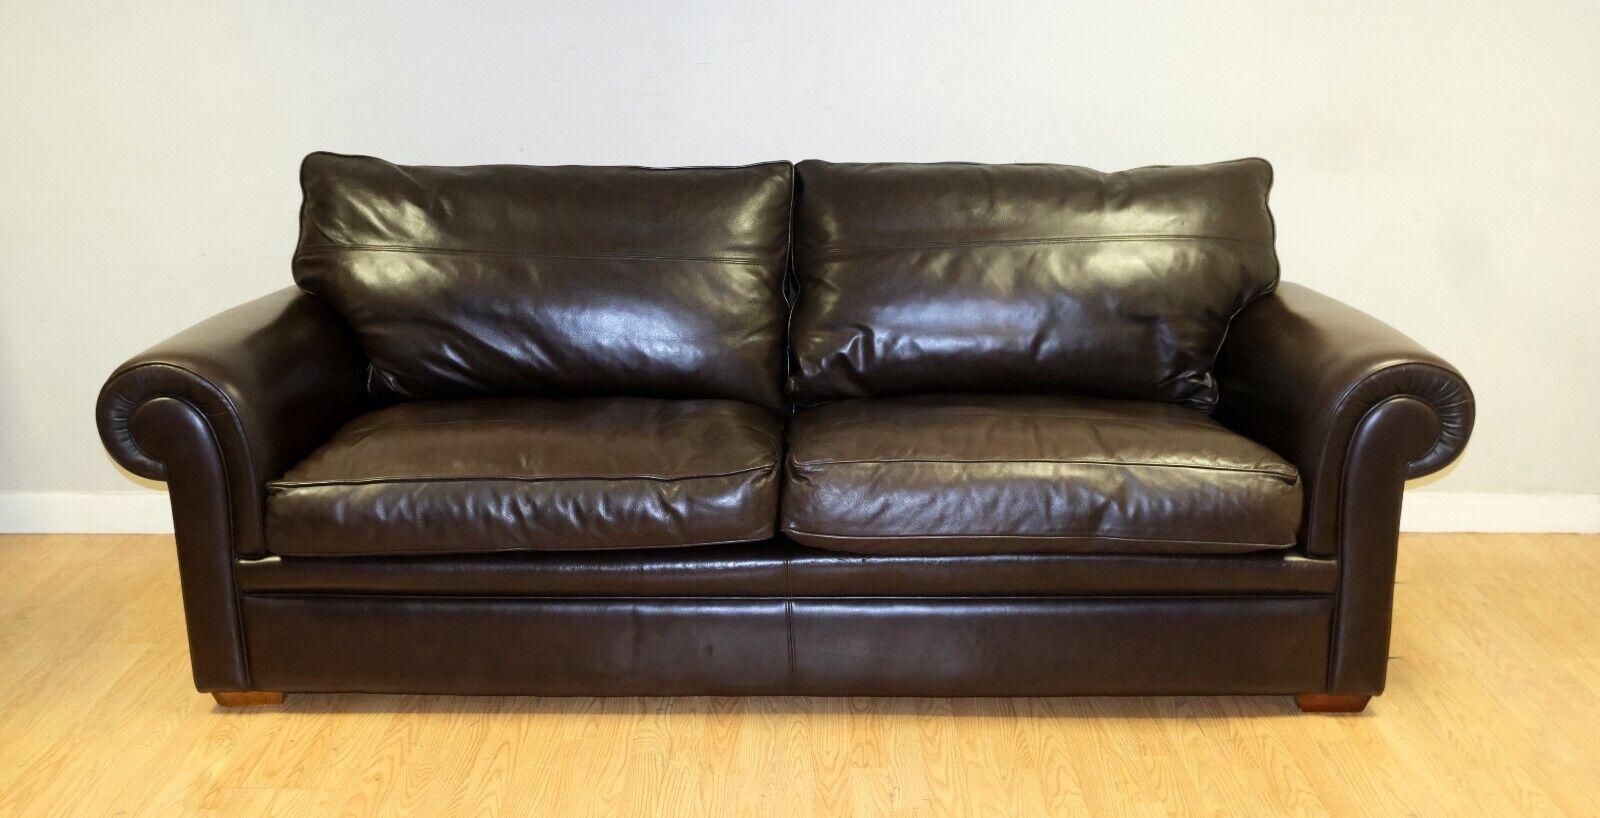 STUNNiNG DURESTA GARRICK THREE SEATER BROWN LEATHER SOFA ON CLASSIC SCROLL ARMS For Sale 4